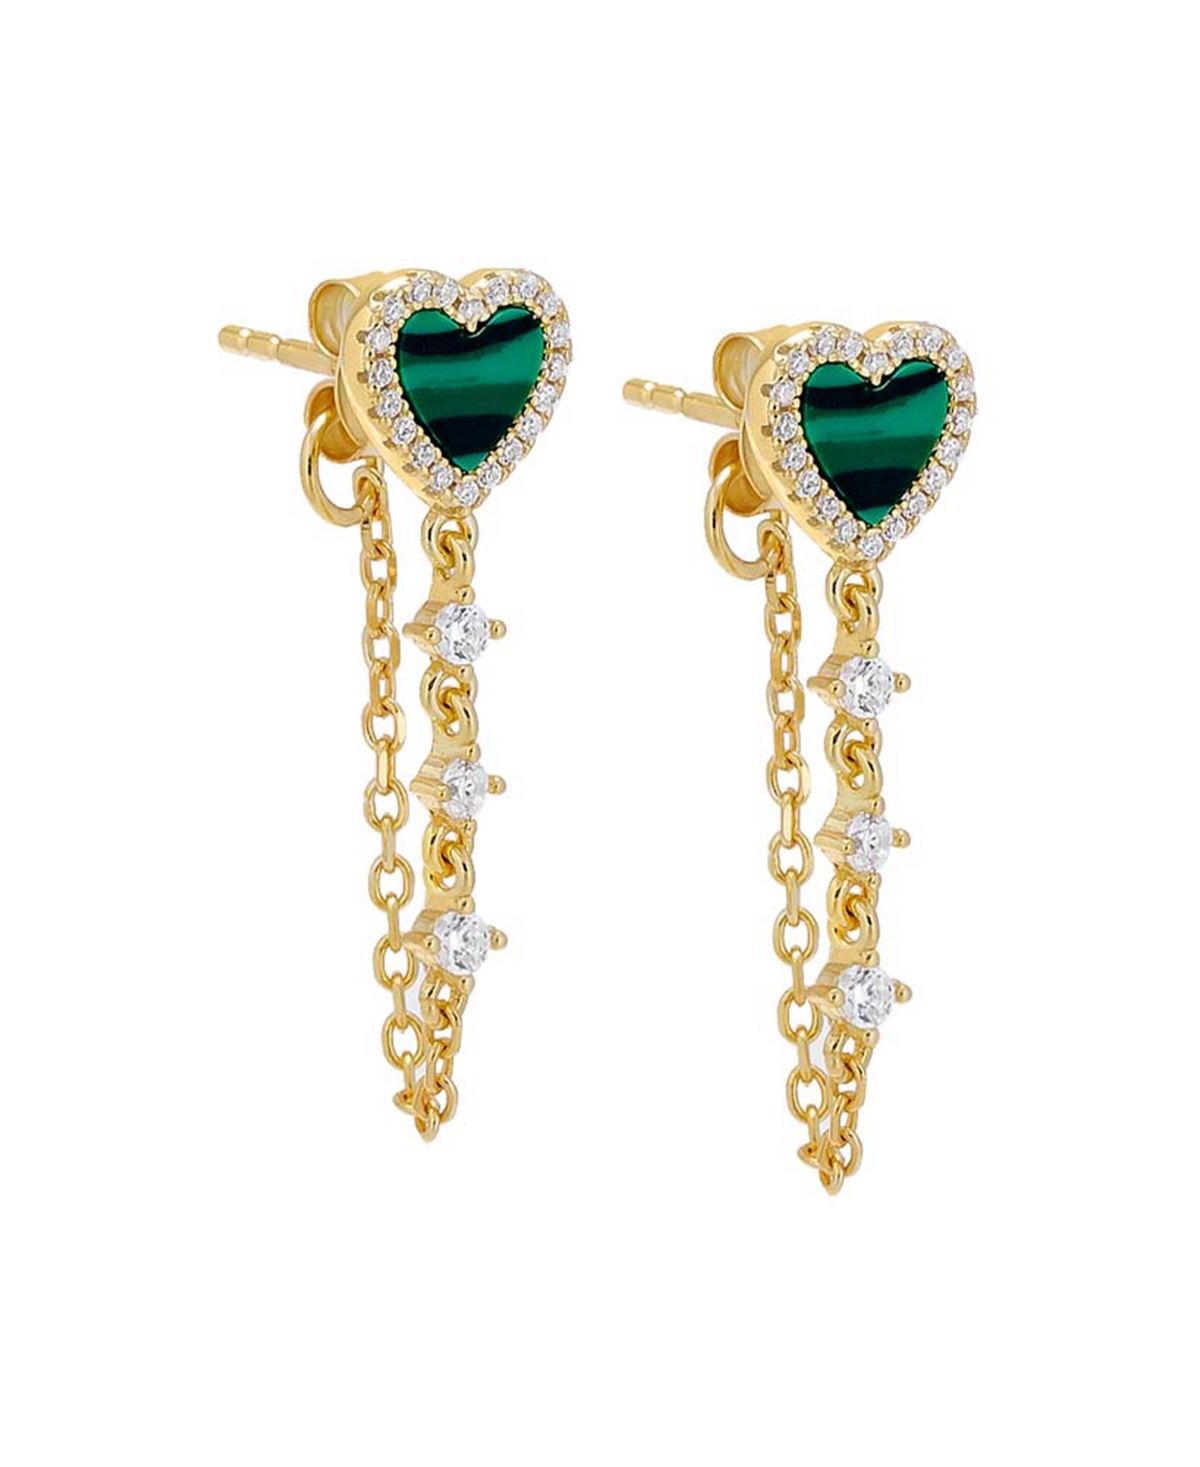 By Adina Eden 14k Gold-plated Sterling Silver Pave & Mother-of-pearl Heart Front-to-back Earrings In Green